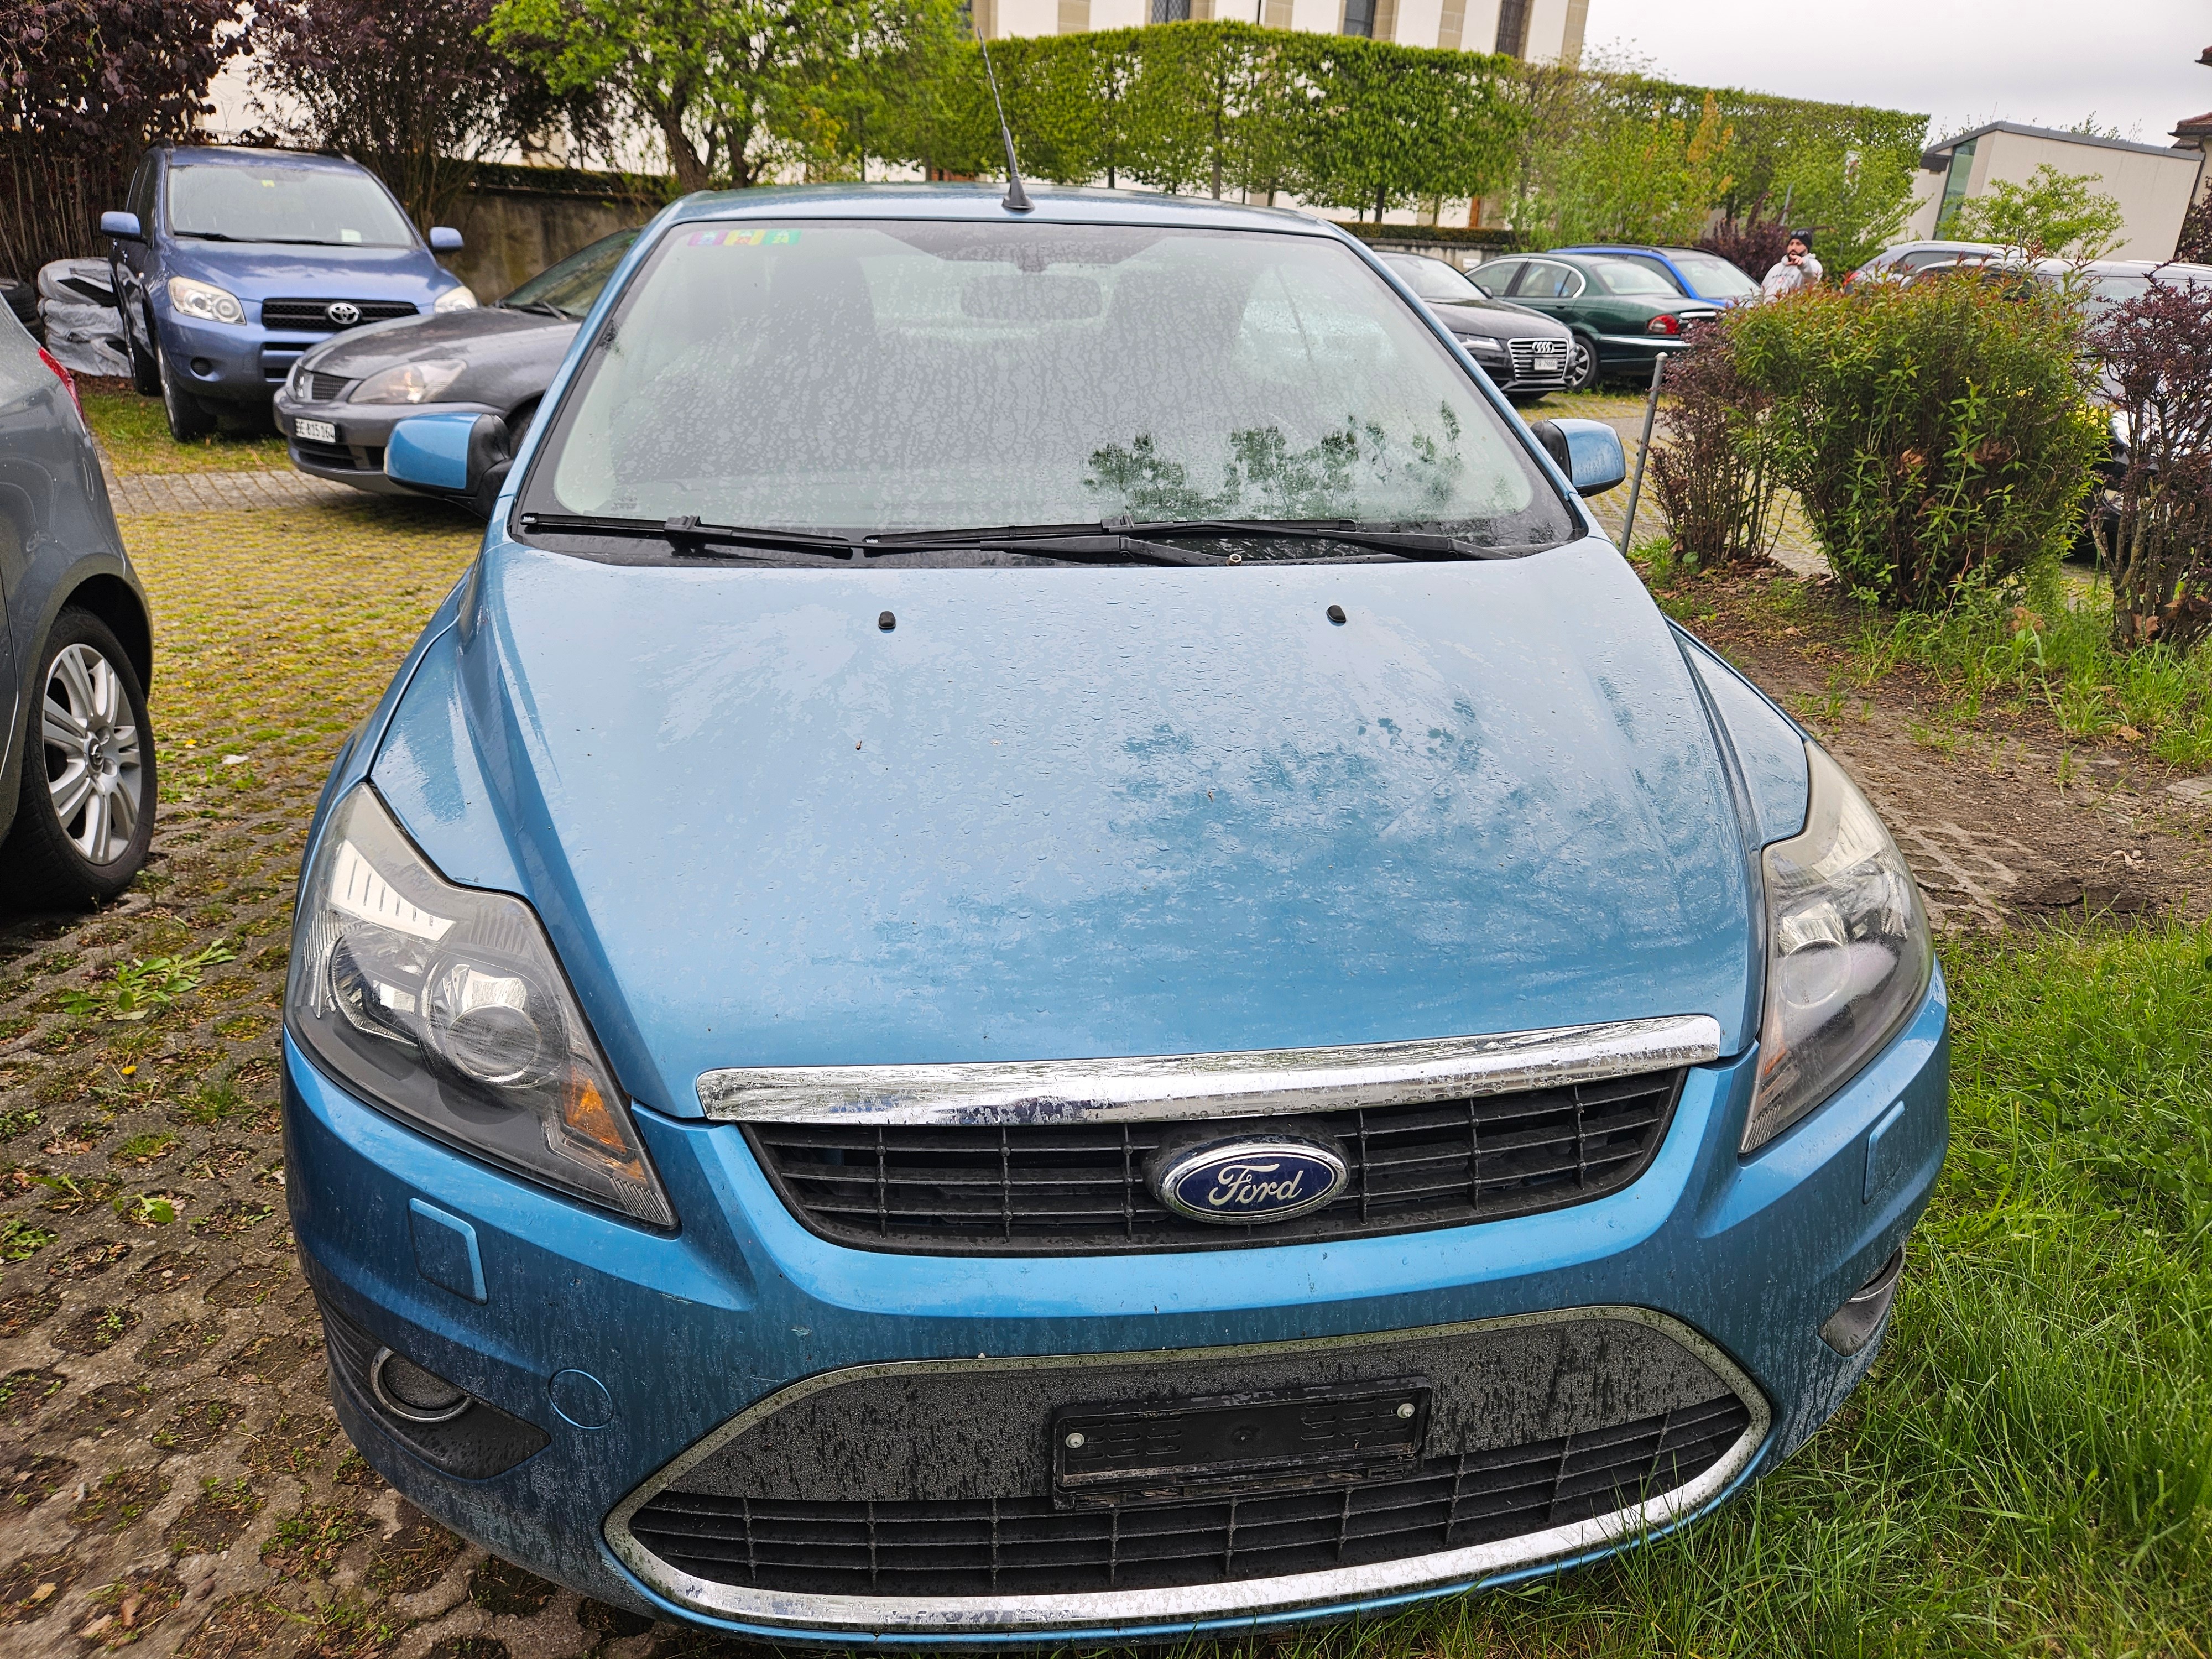 FORD Focus CC 2.0i Carving Automatic